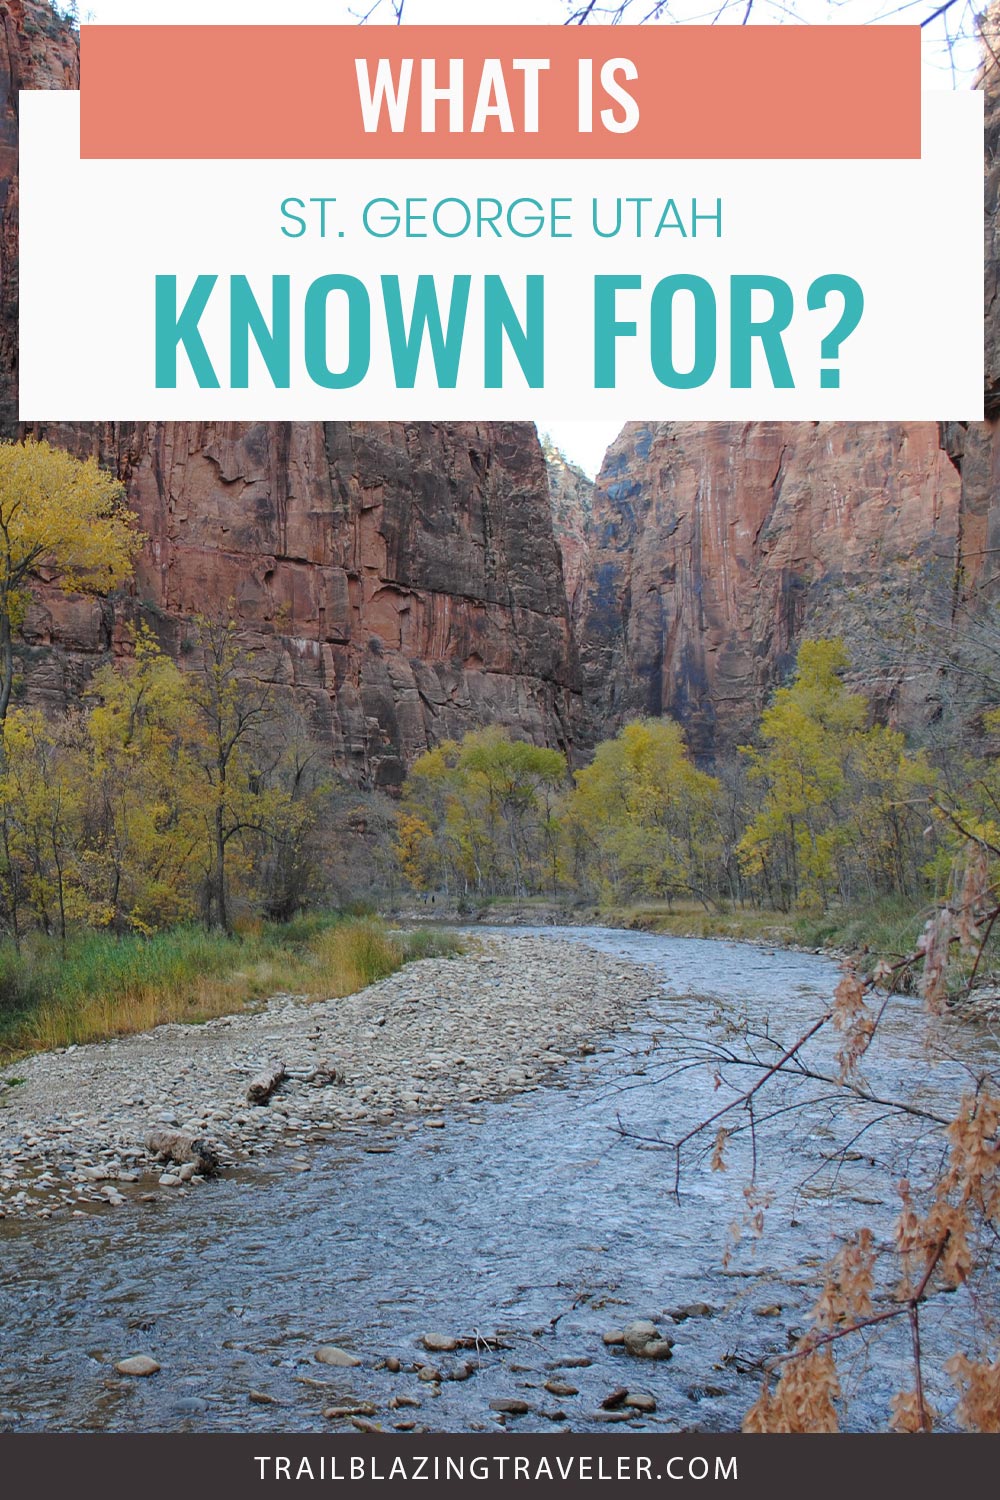 What Is St. George Utah Known For?